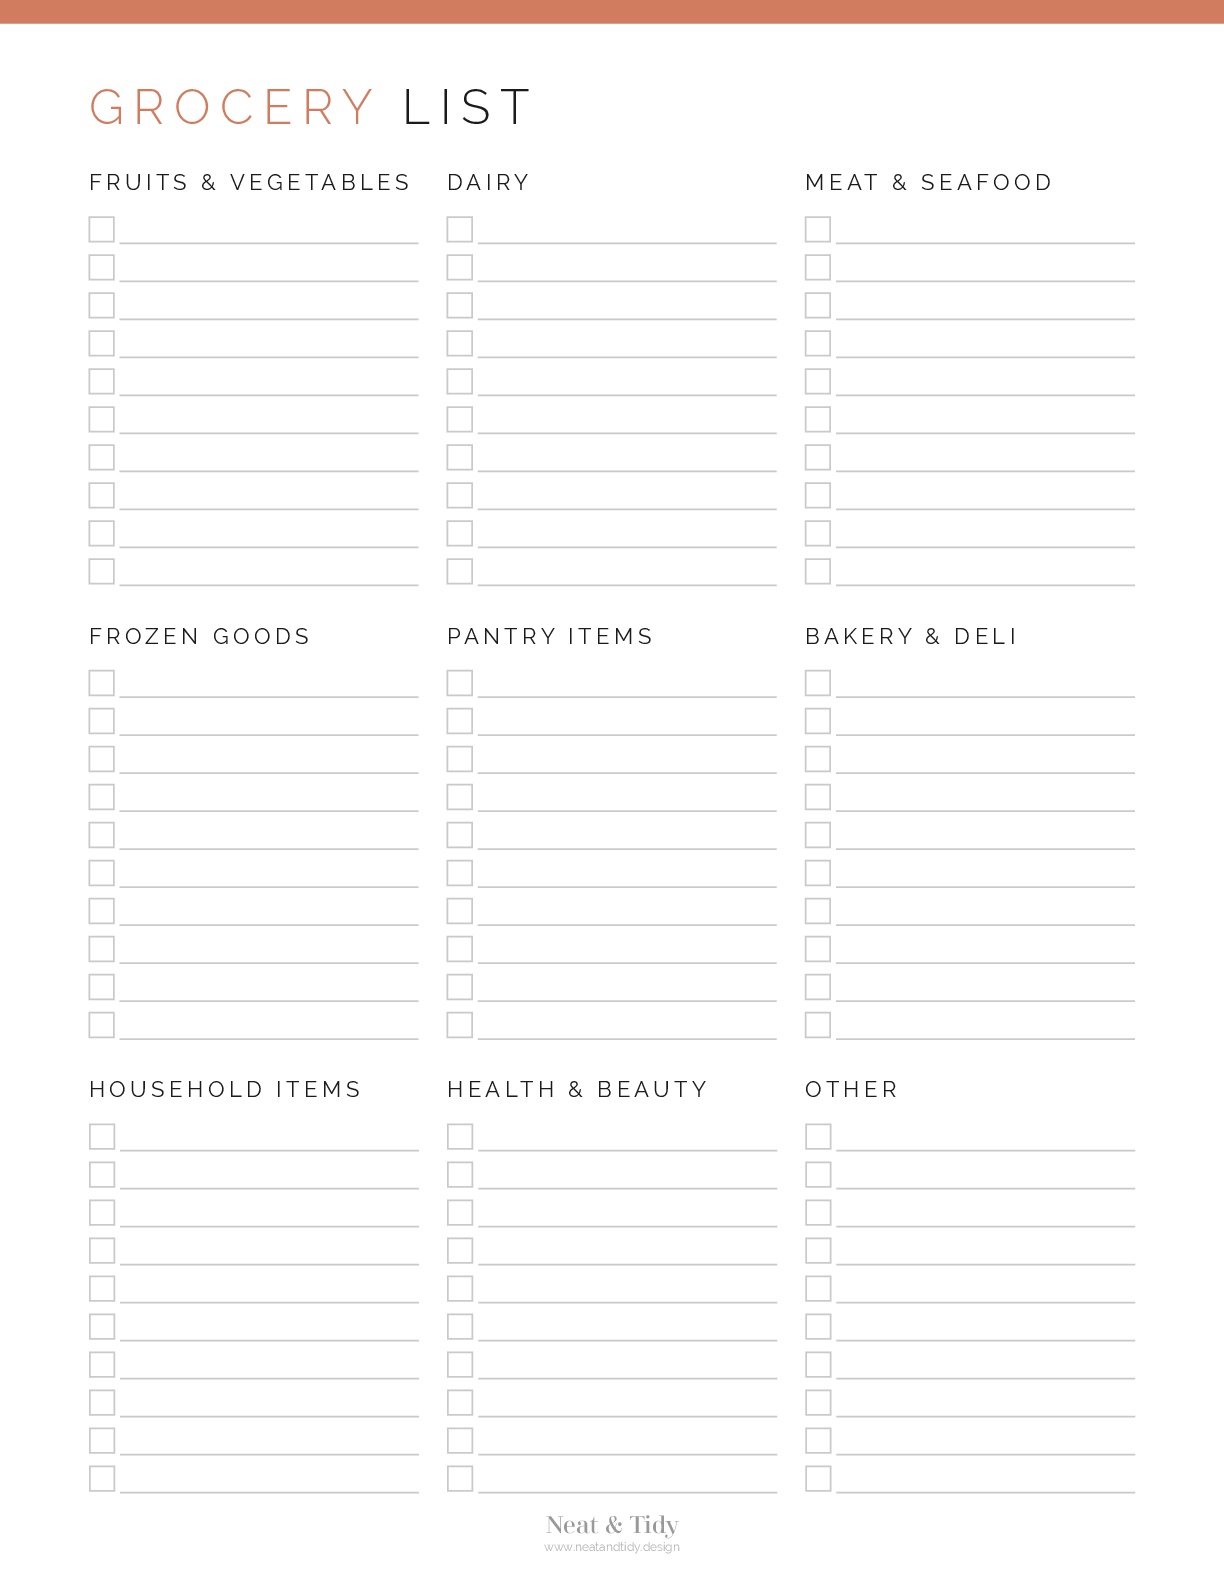 Grocery List with Categories - Neat and Tidy Design